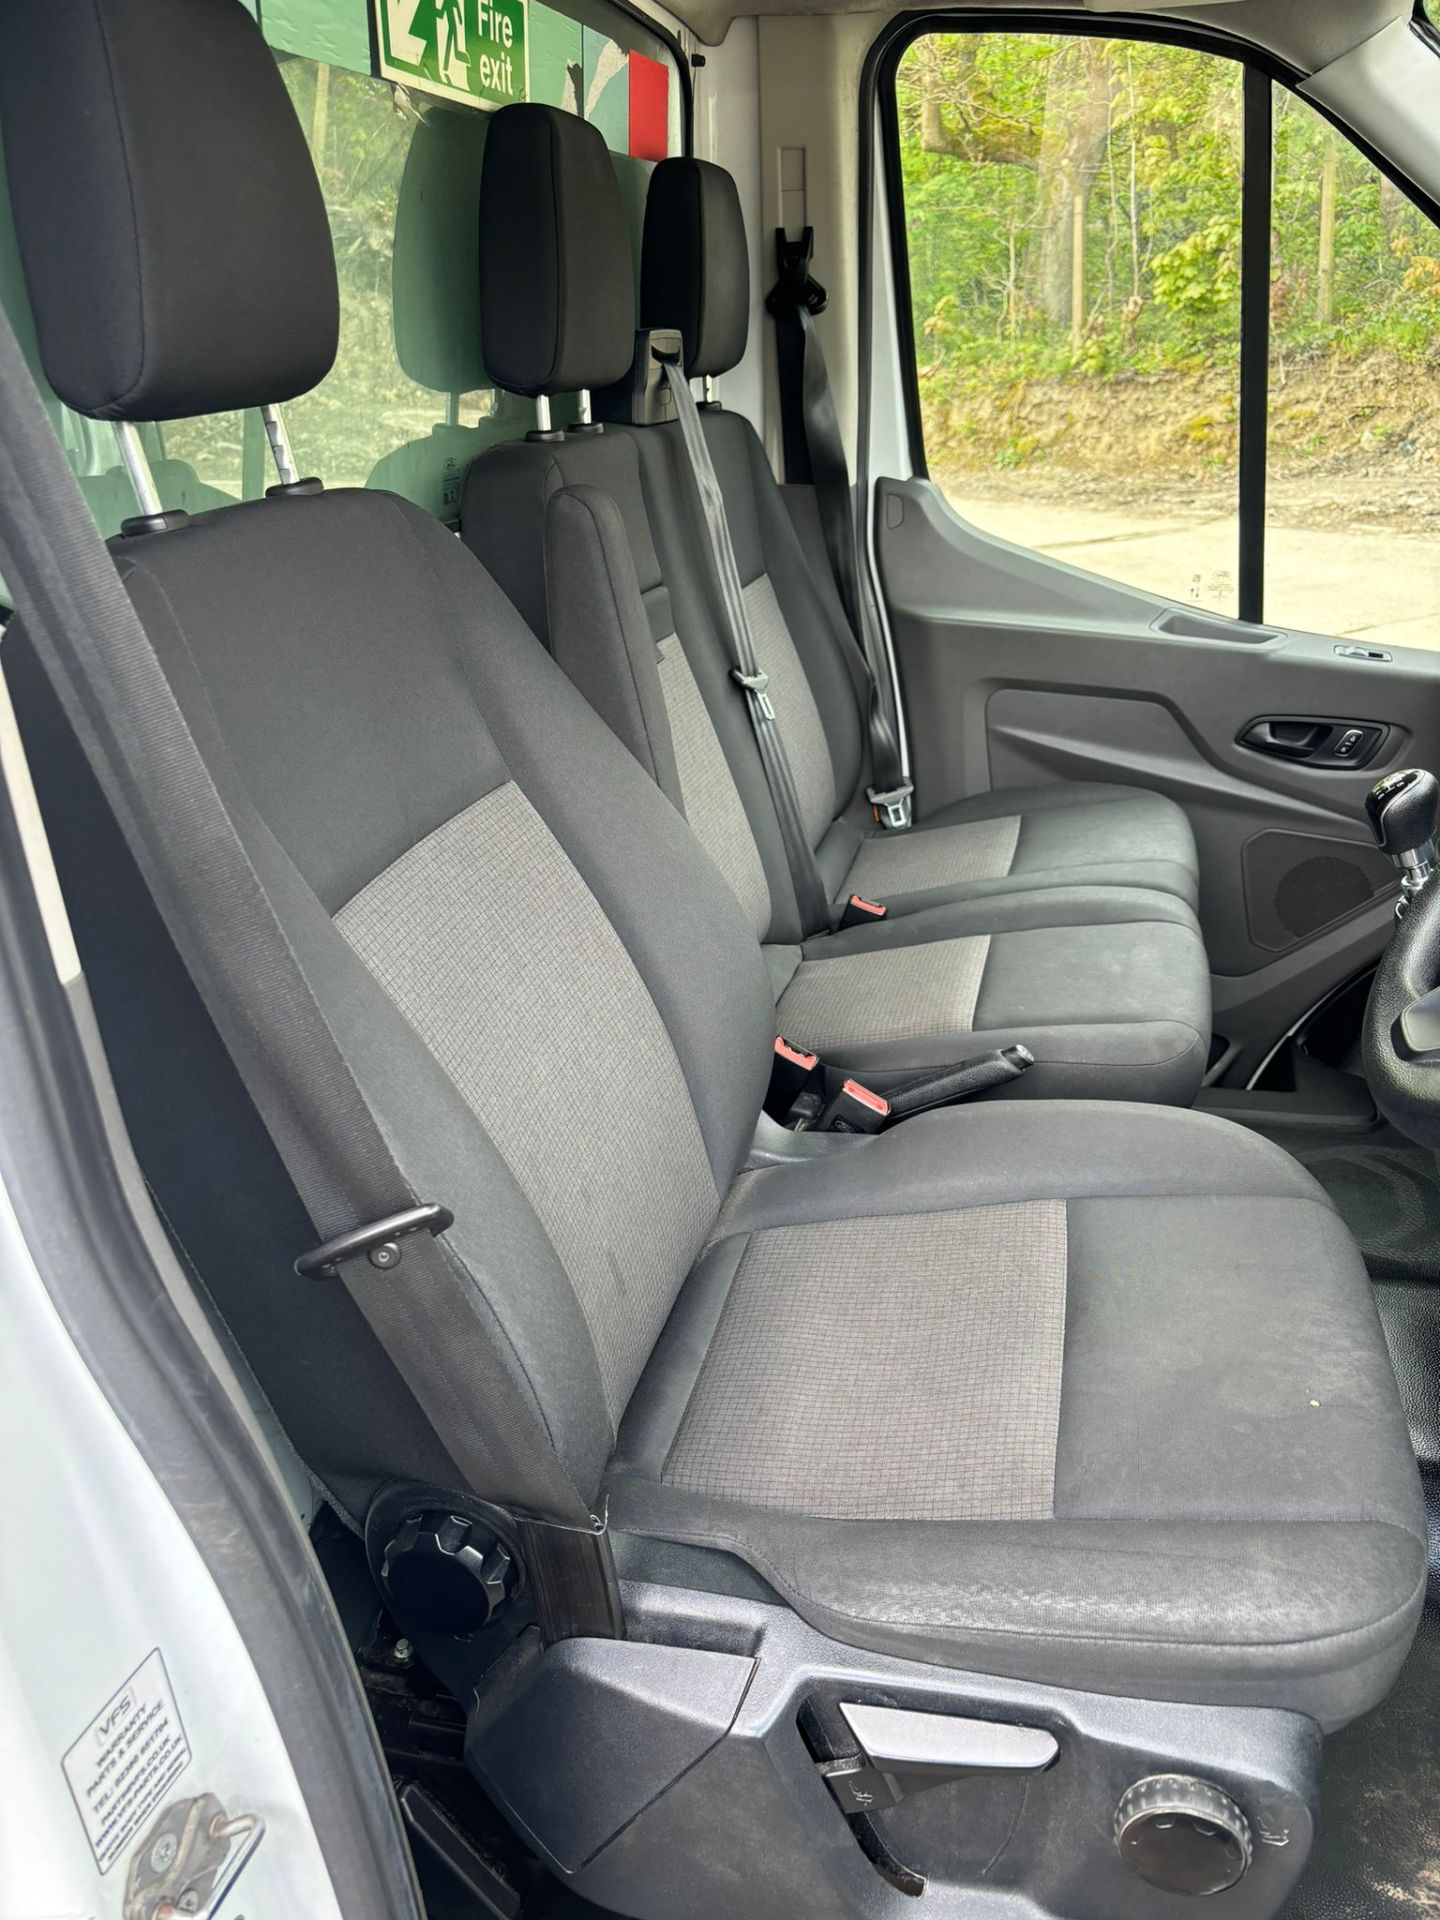 2021 FORD TRANSIT LUTON BOX VAN WITH TAIL LIFT - SPACIOUS AND RELIABLE! - Bild 8 aus 11